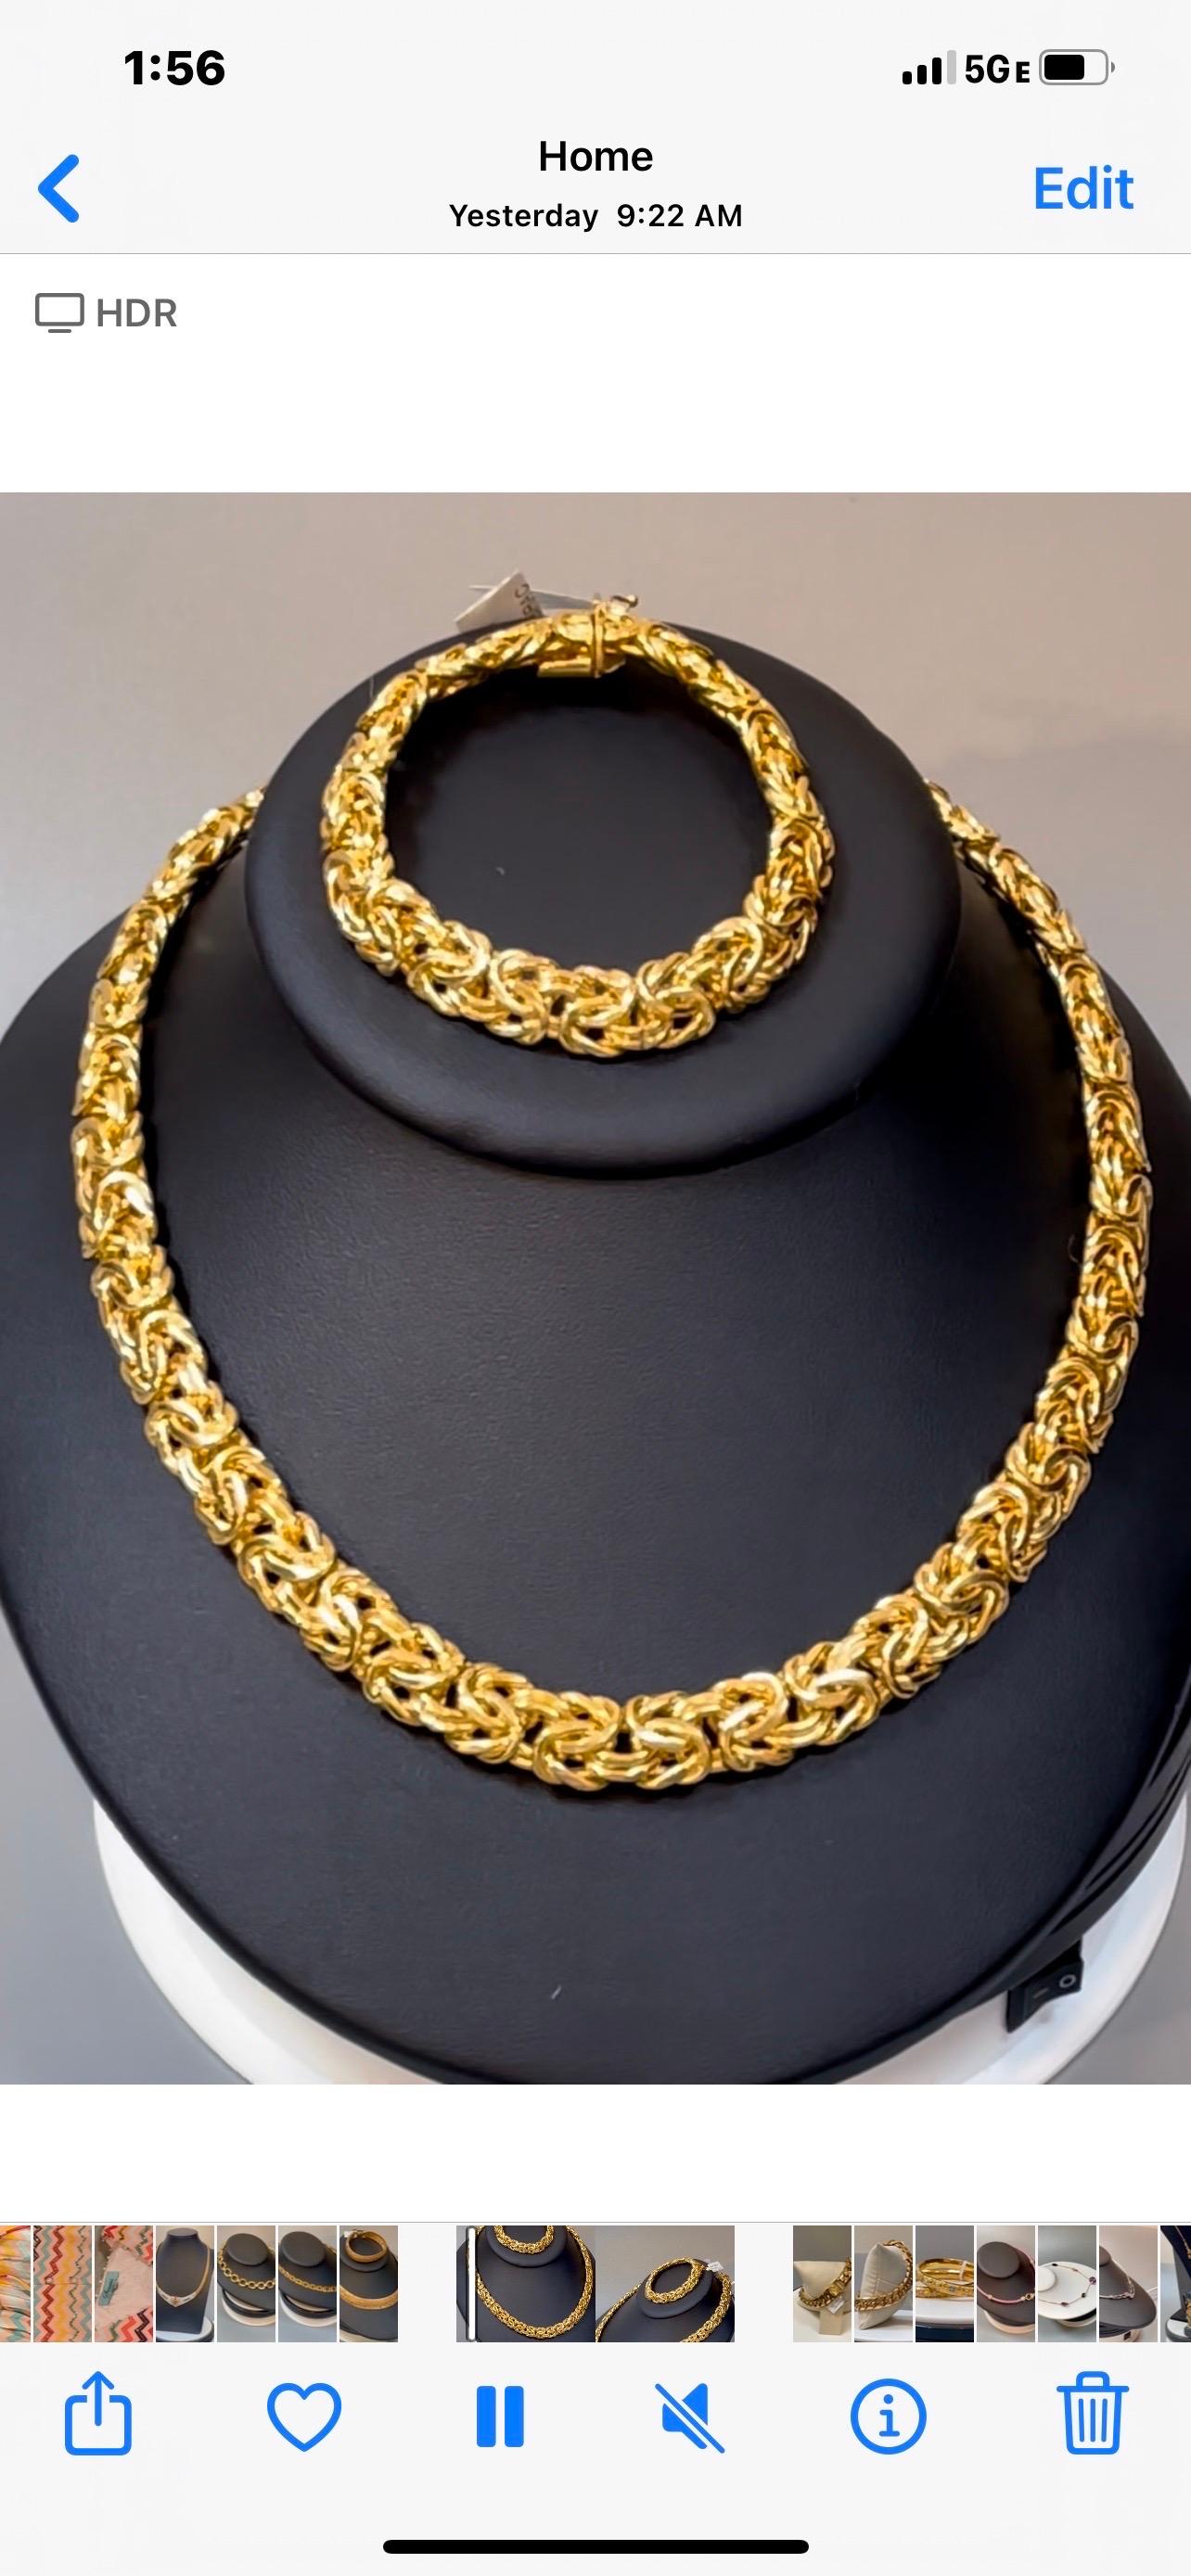 18 Inch long Link Necklace and 7.5 inch long bracelet , 18 Karat solid Yellow Gold 97 Gm
18 Inches long Necklace , width is 12mm or approximately half inch
You can combine the bracelet to the necklace to make it a longer necklace and it will fit